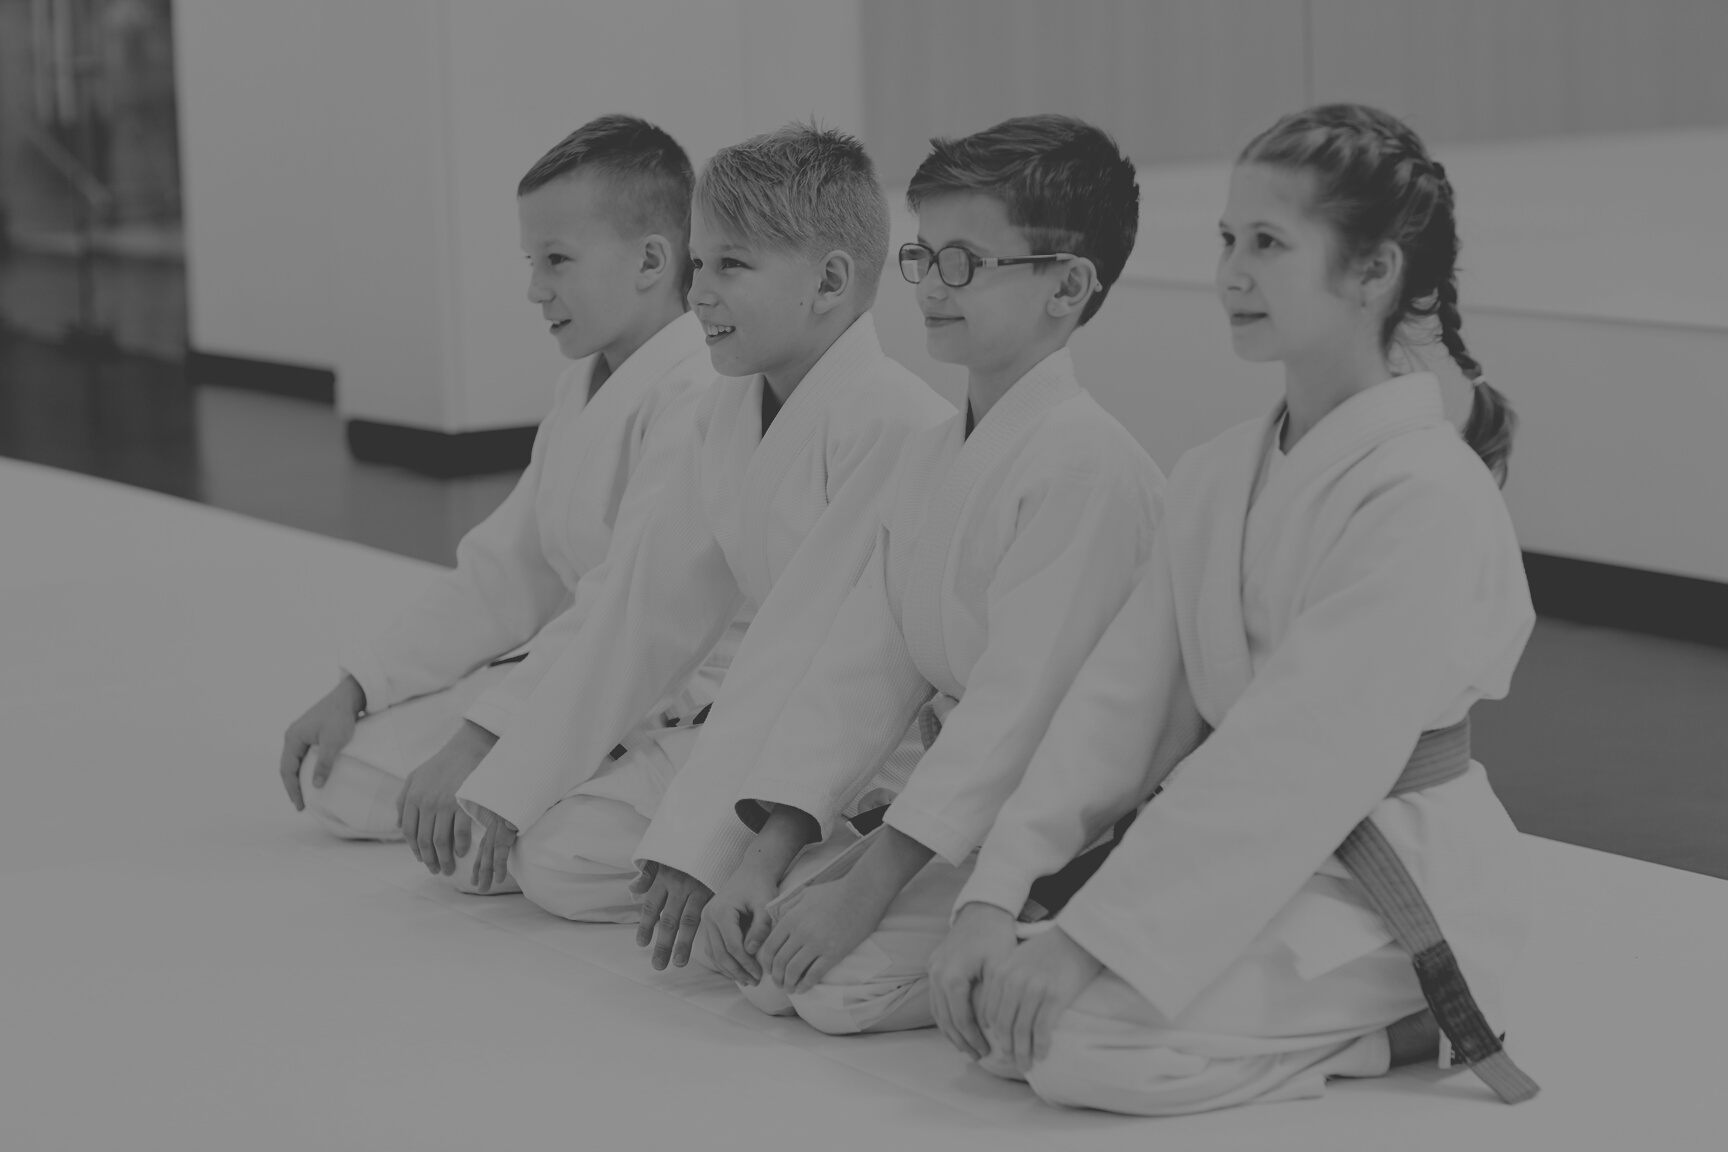 Young judoists doing judo